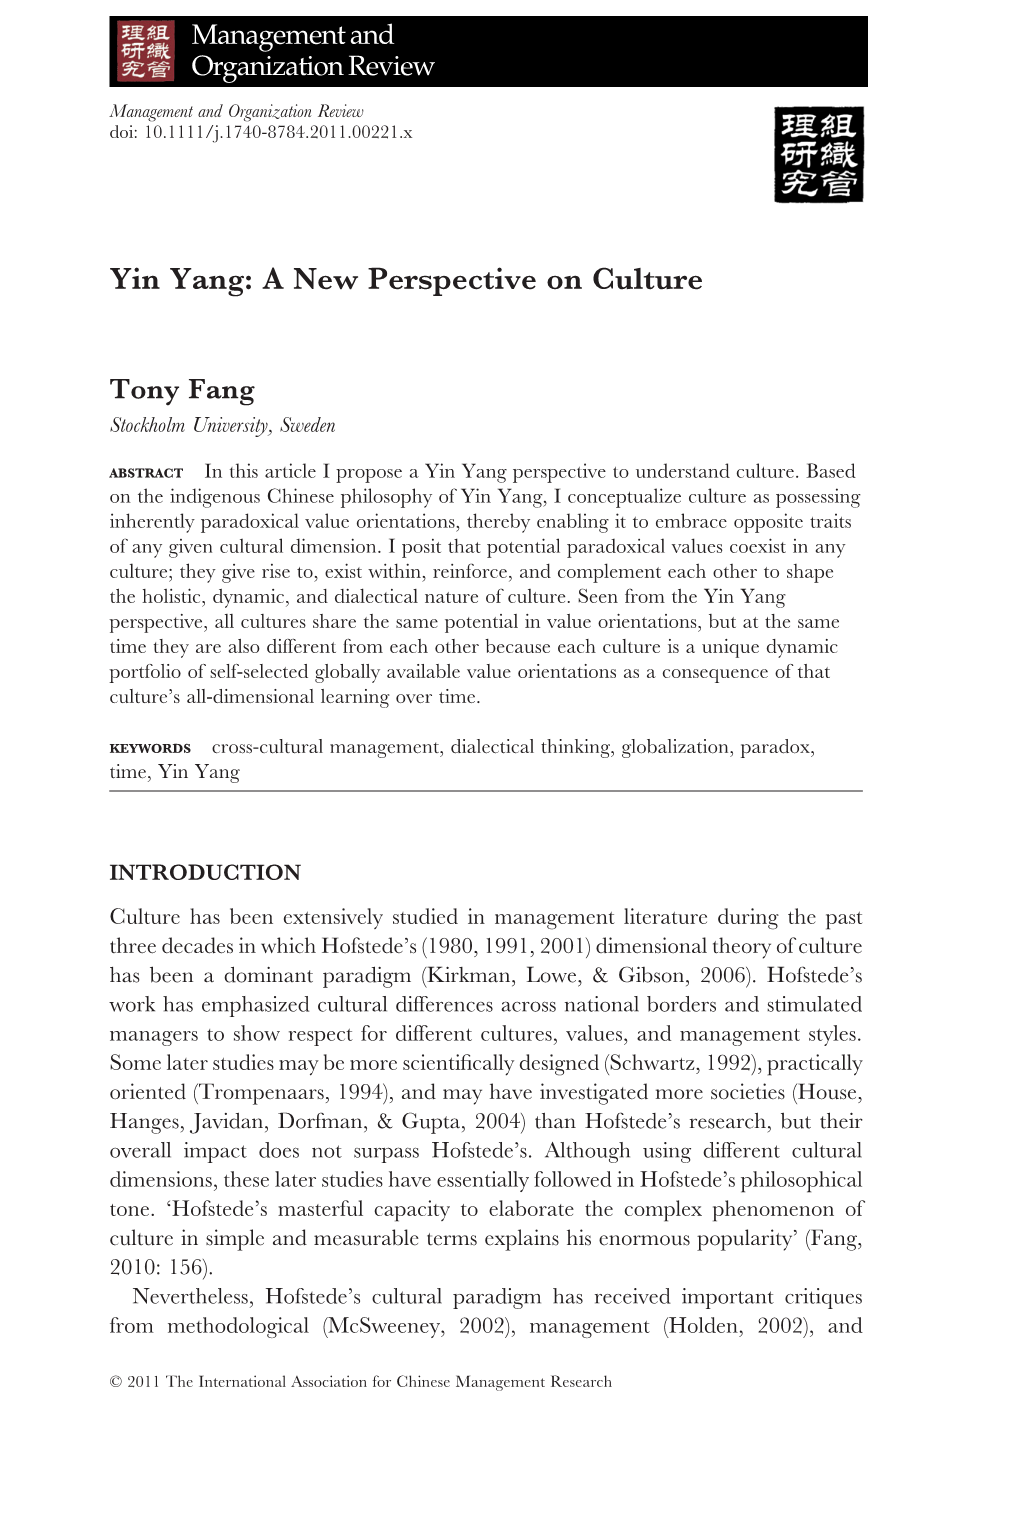 Yin Yang: a New Perspective on Culture